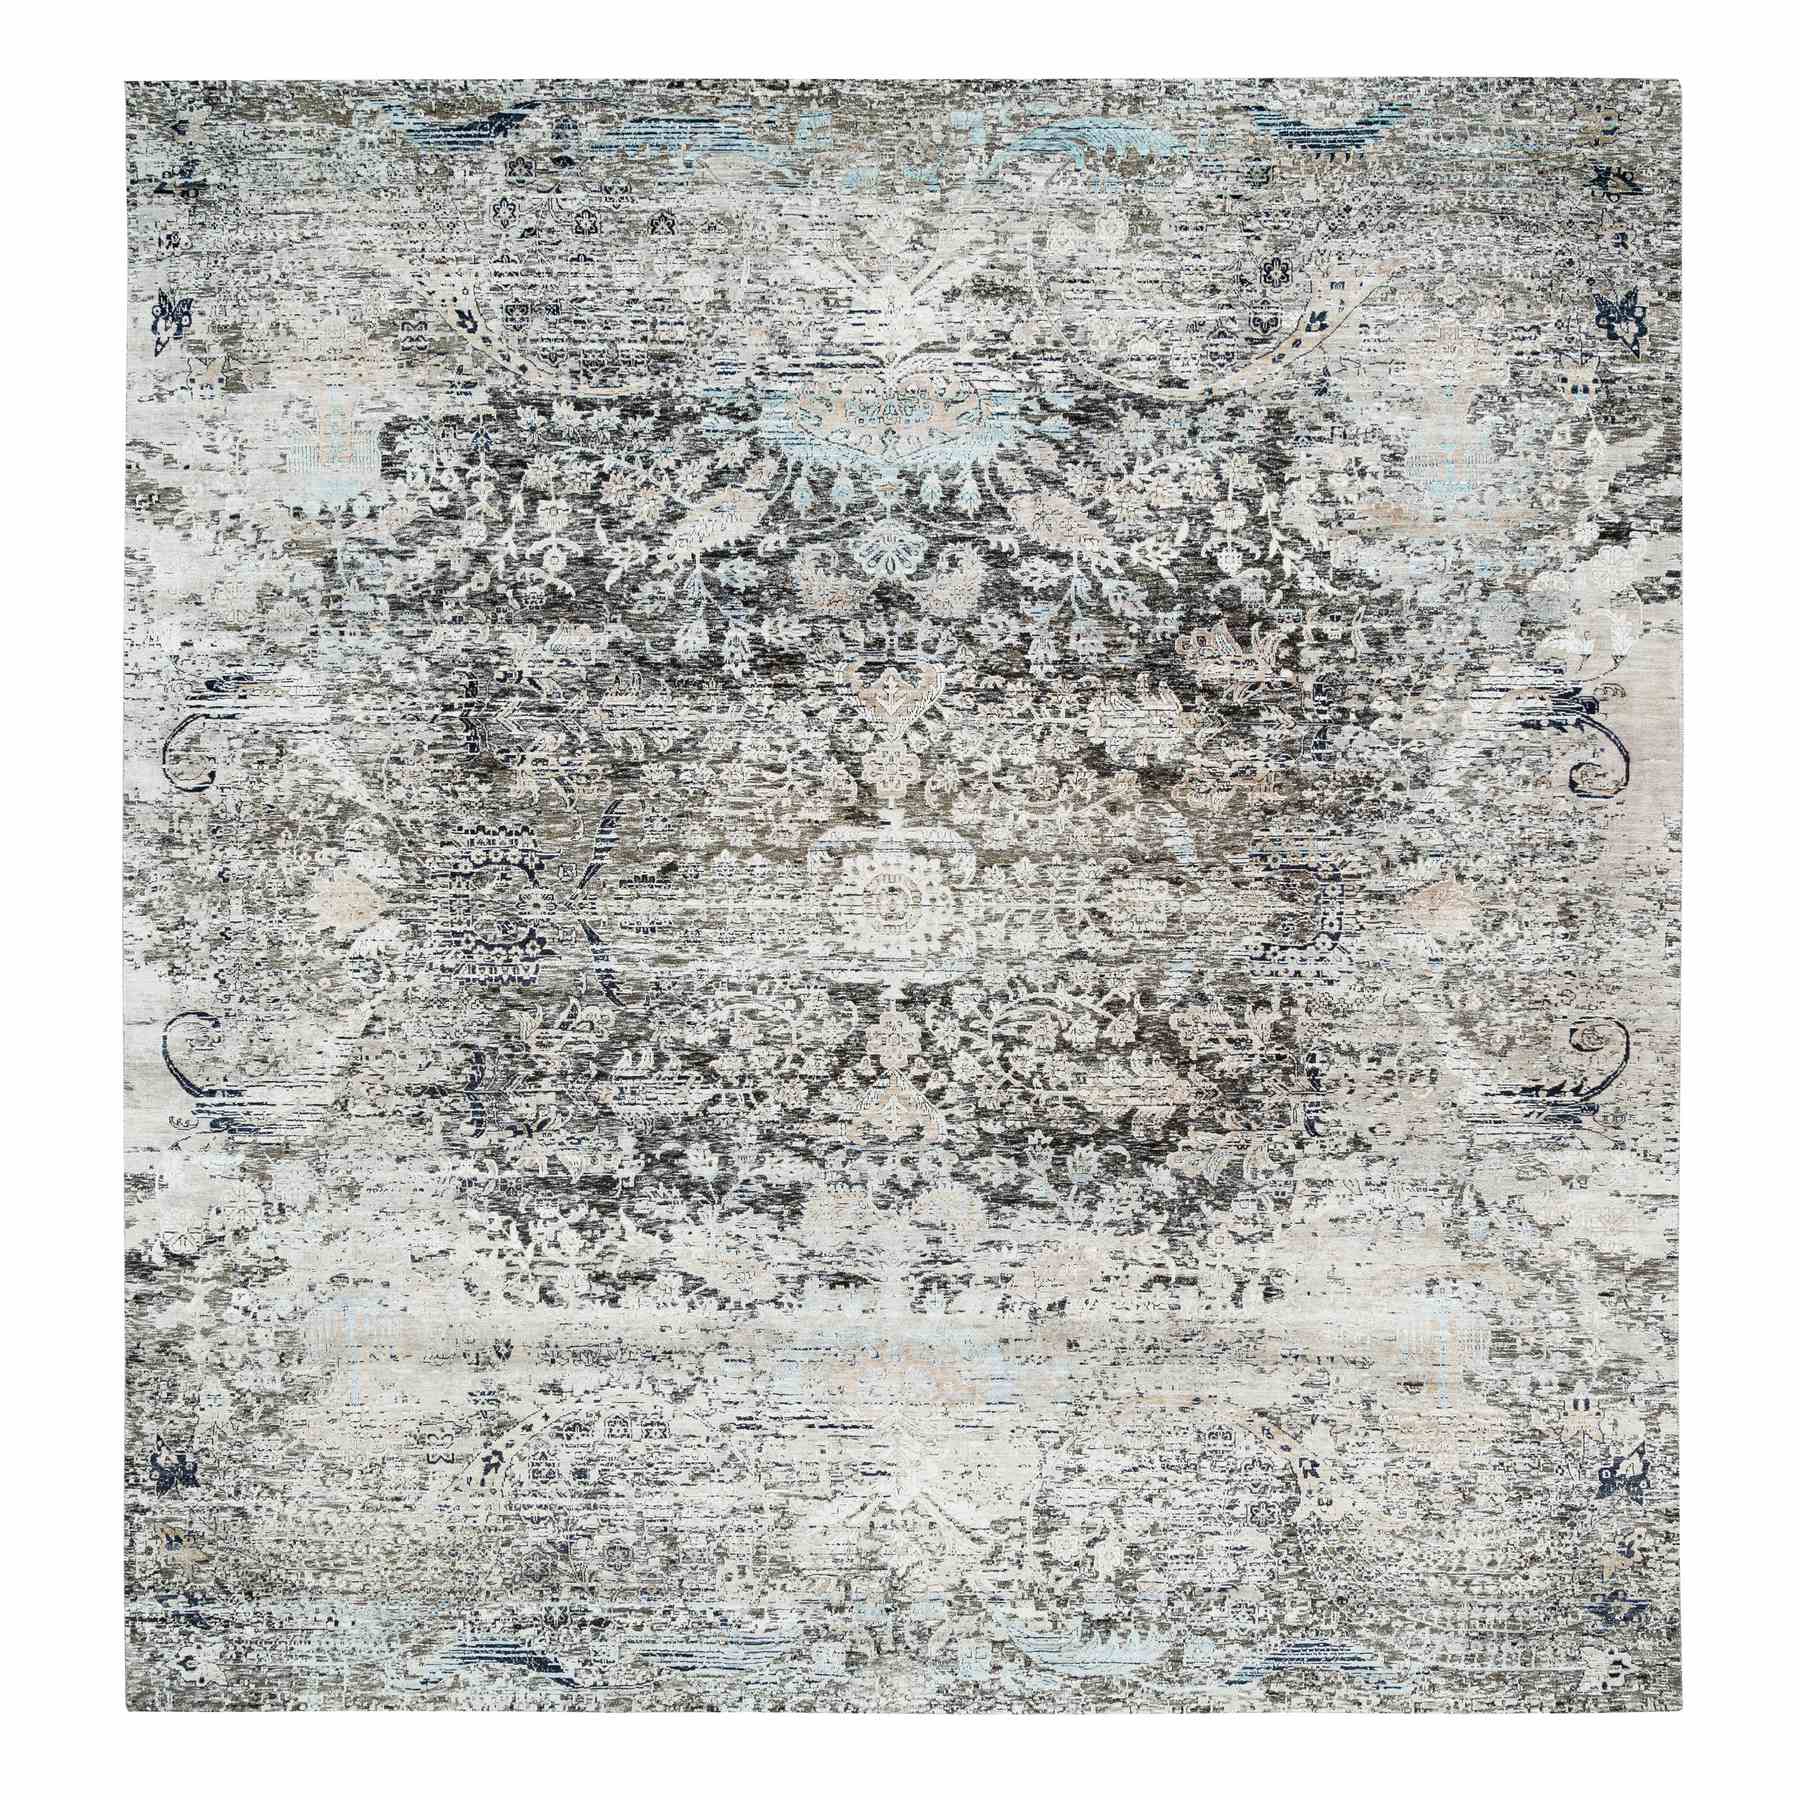  Silk Hand-Knotted Area Rug 11'9